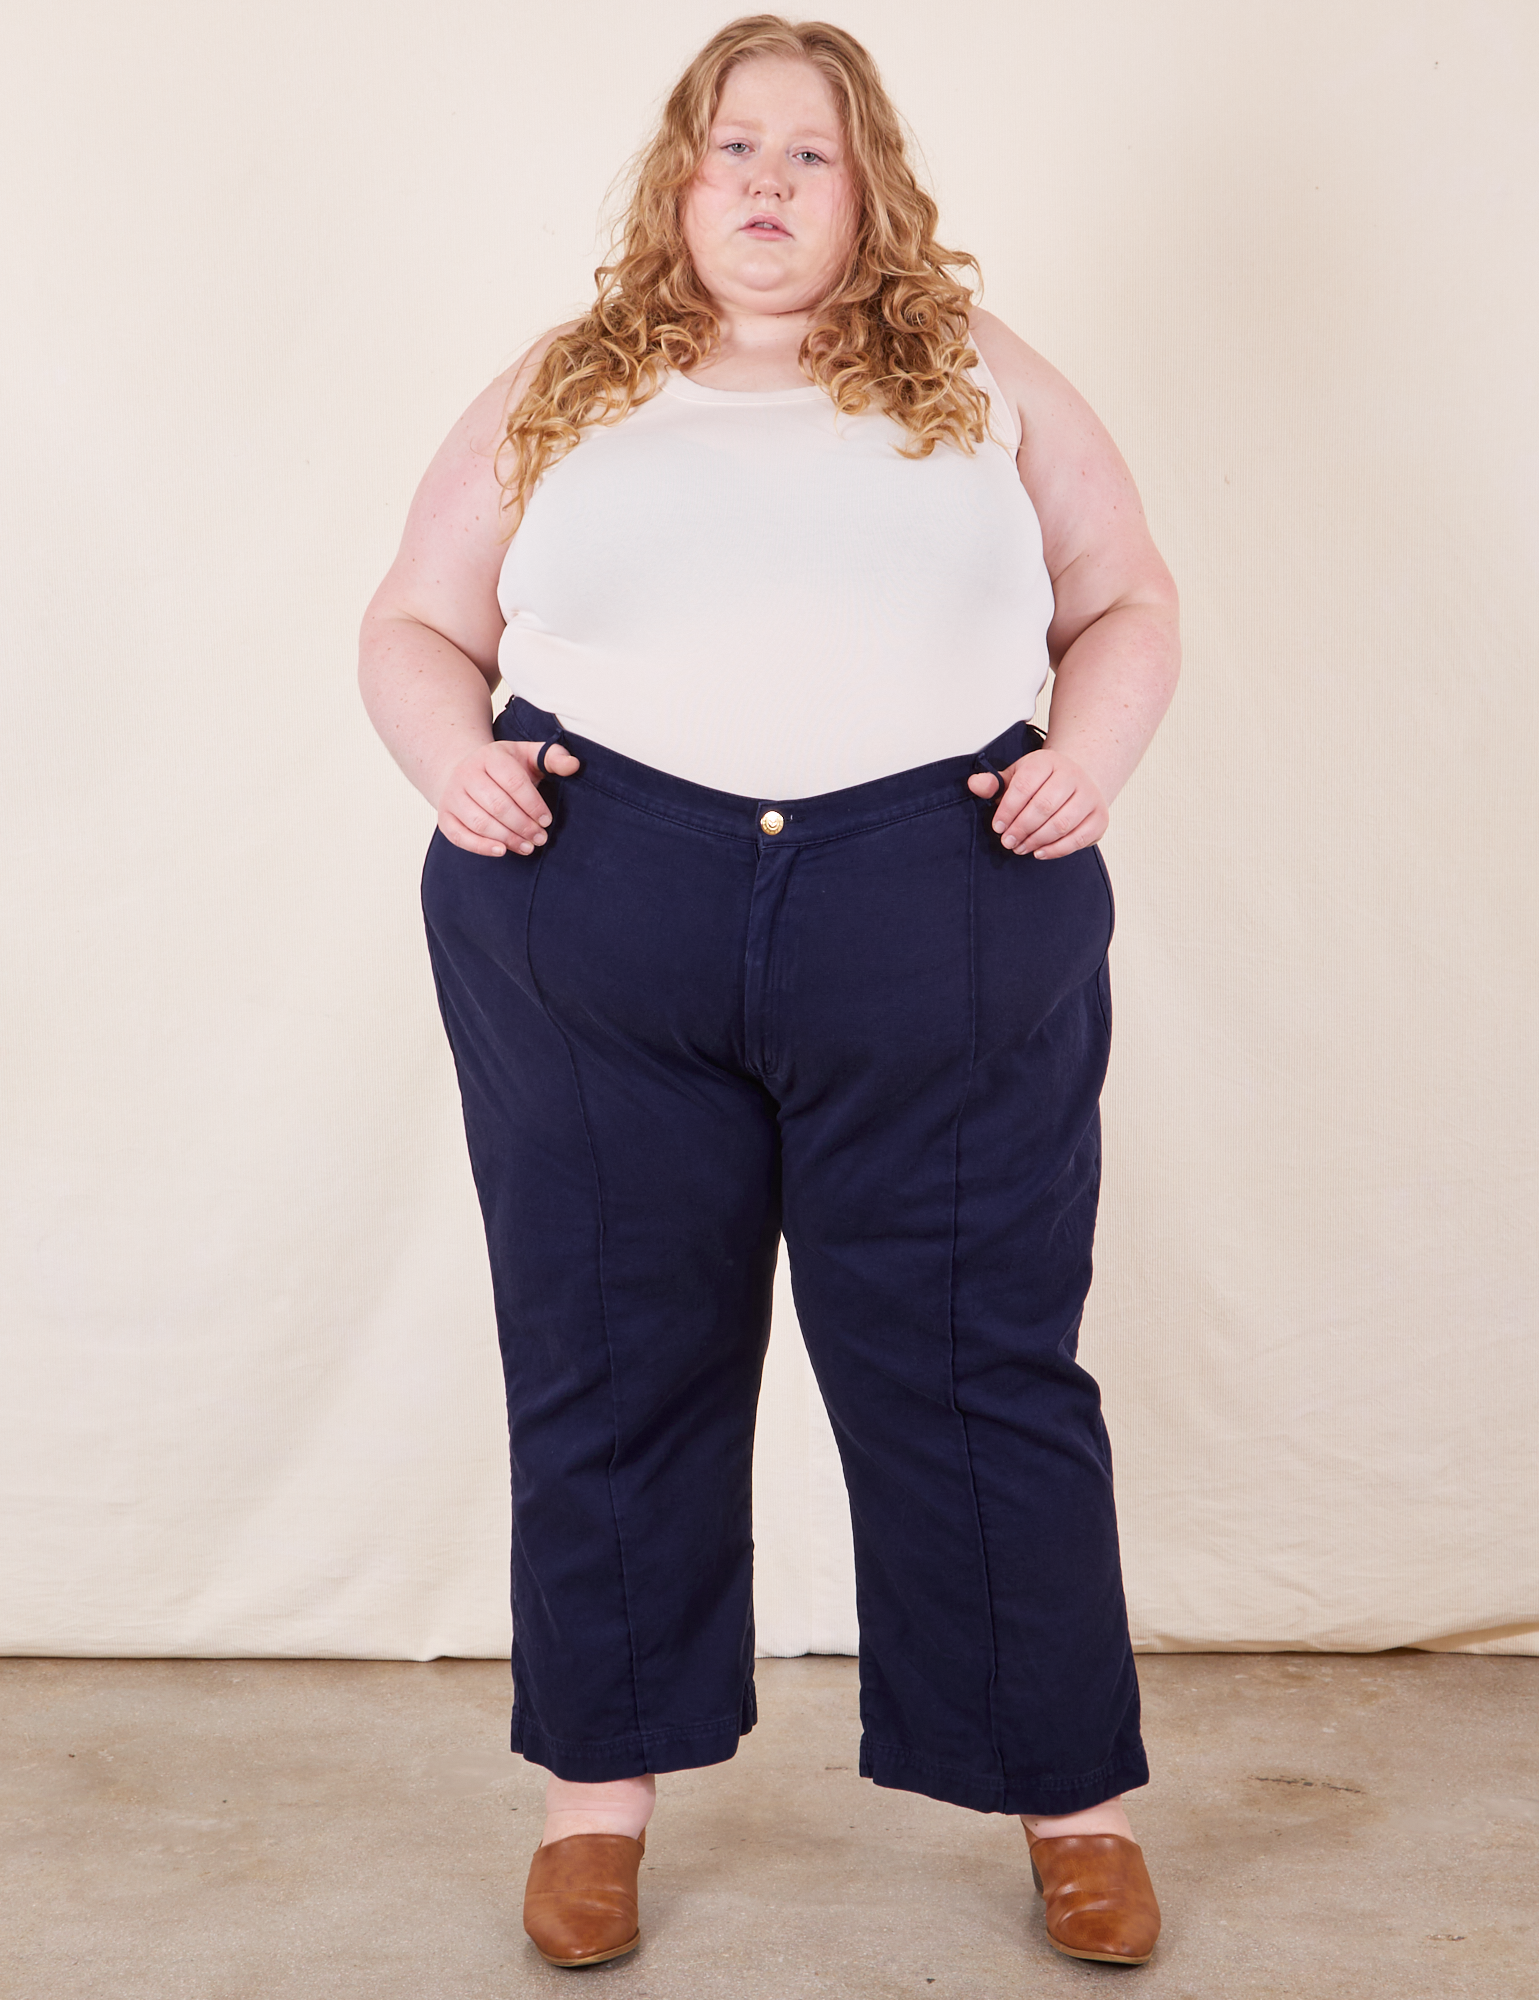 Catie is 5'11" and wearing 5XL Western Pants in Navy Blue paired with vintage off-white Tank Top